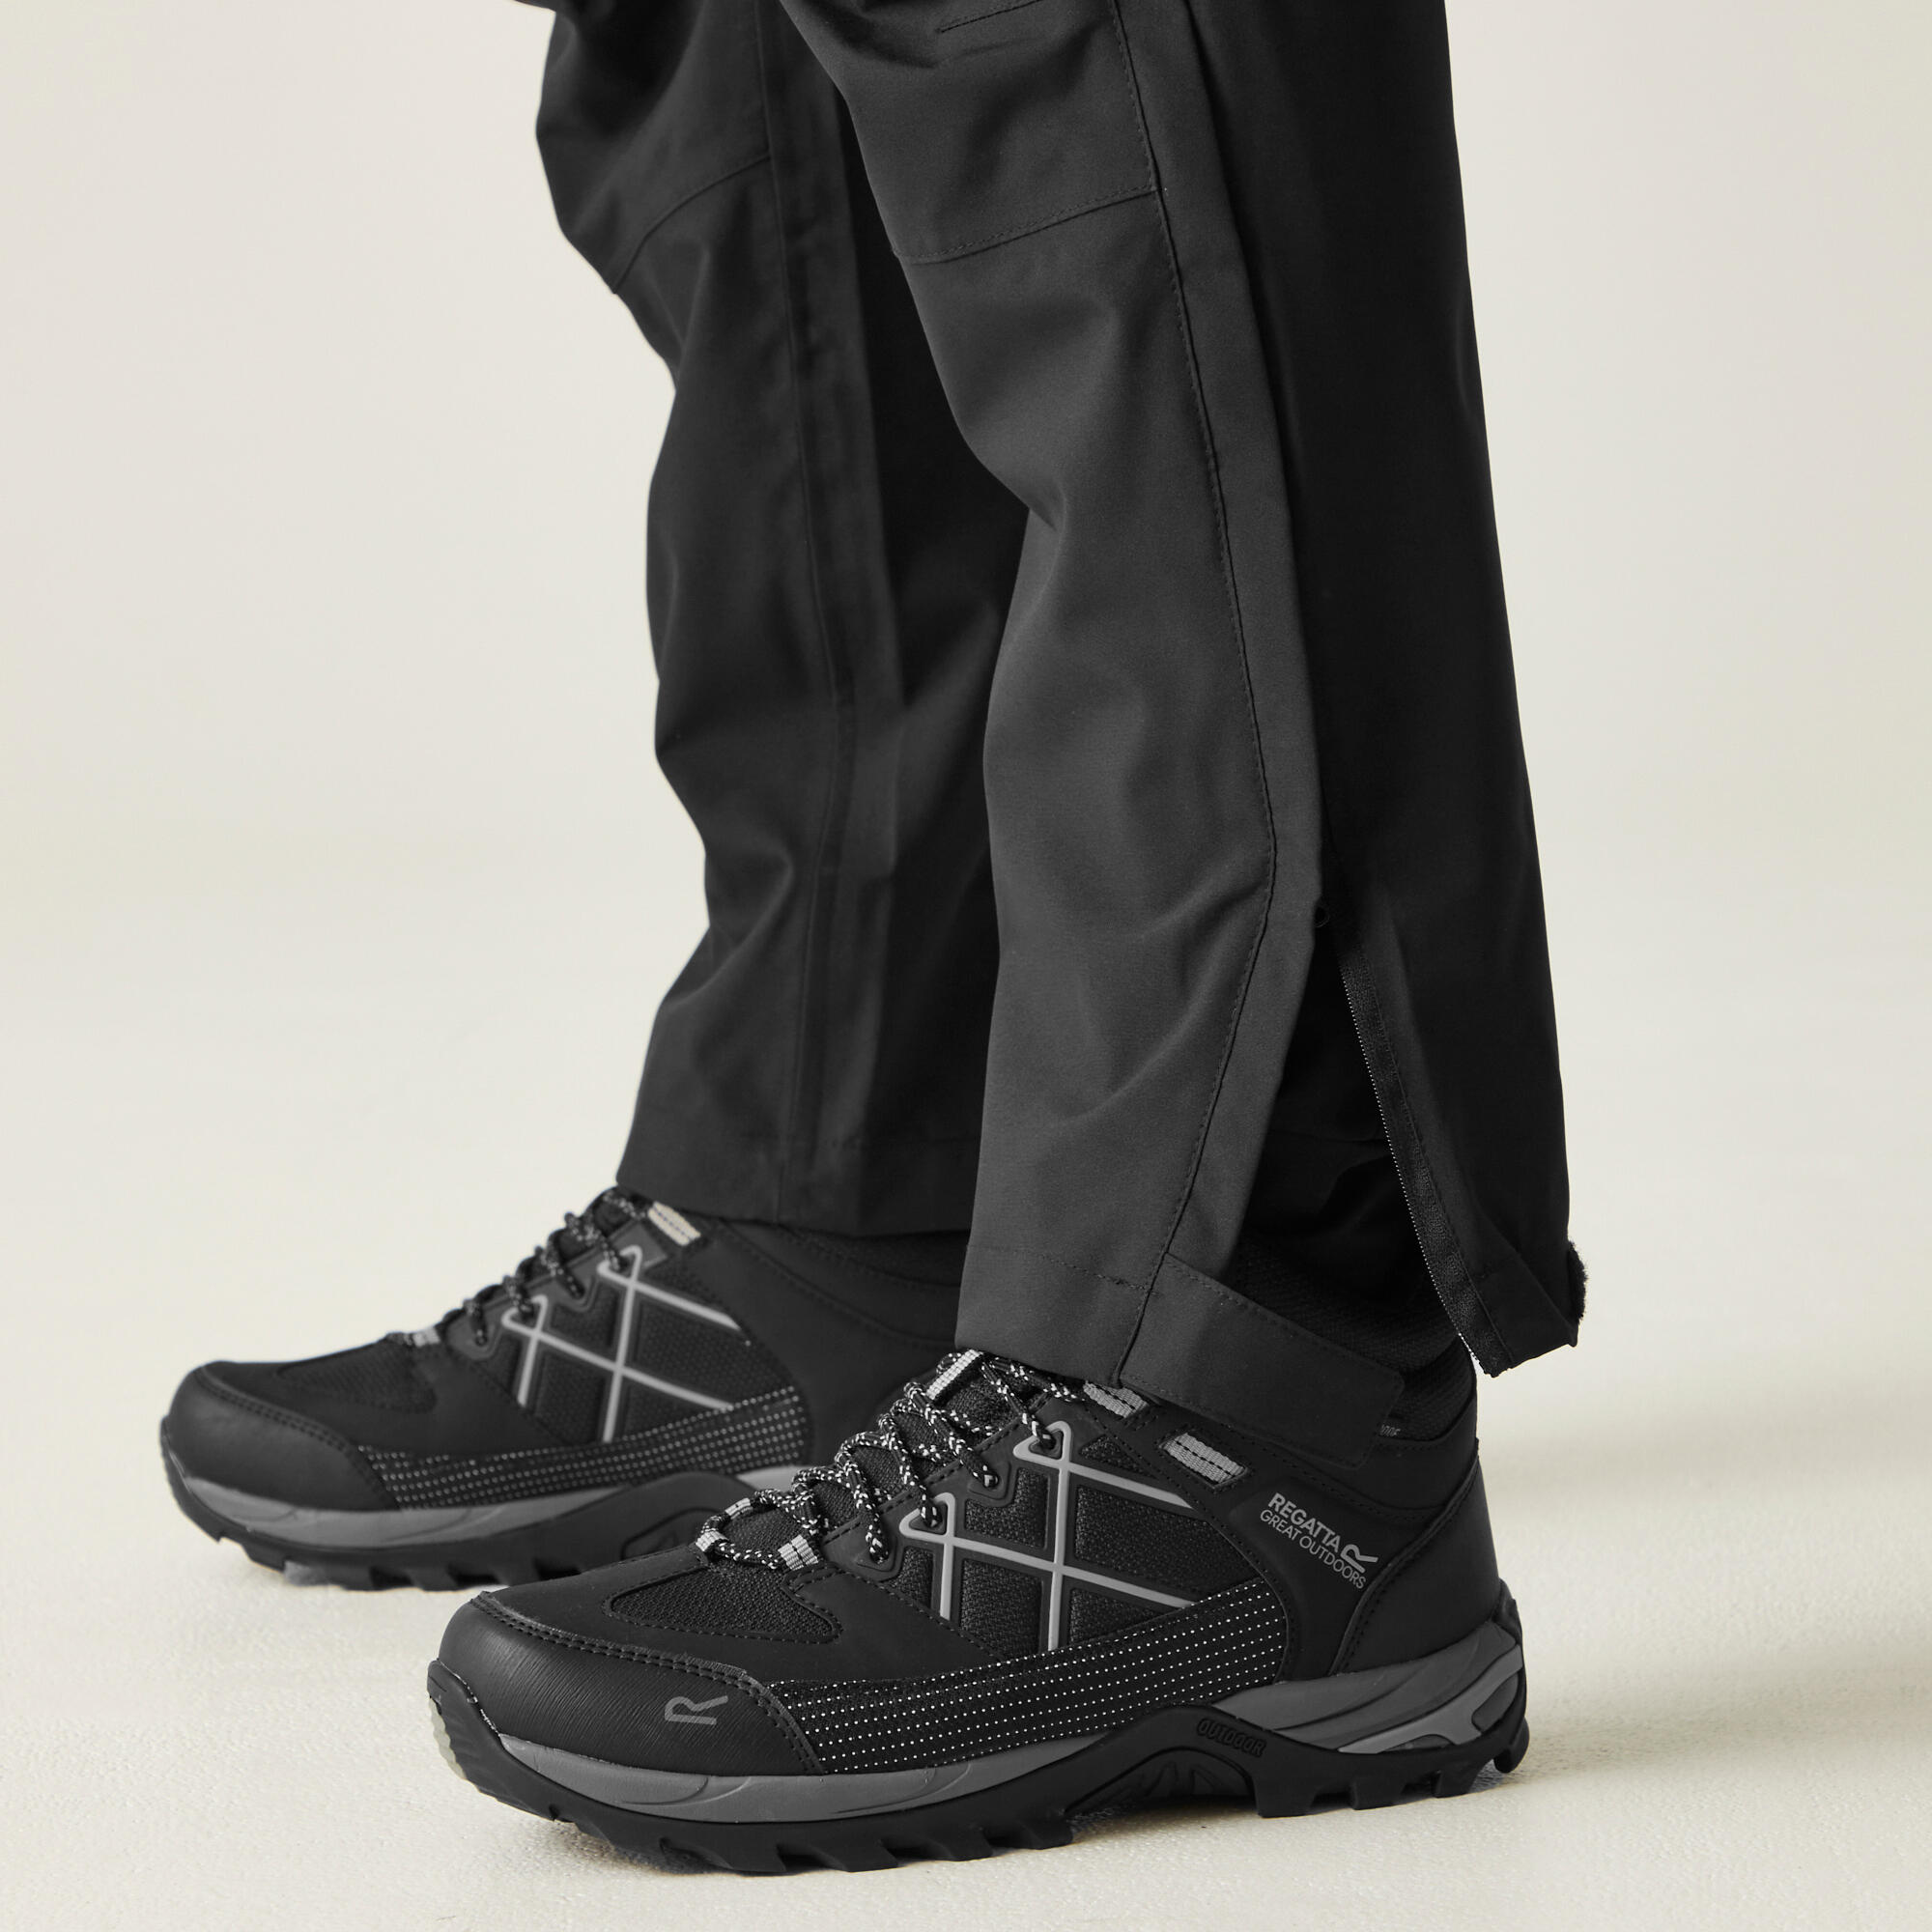 Highton Stretch Men's Hiking Overtrousers - Black 4/5